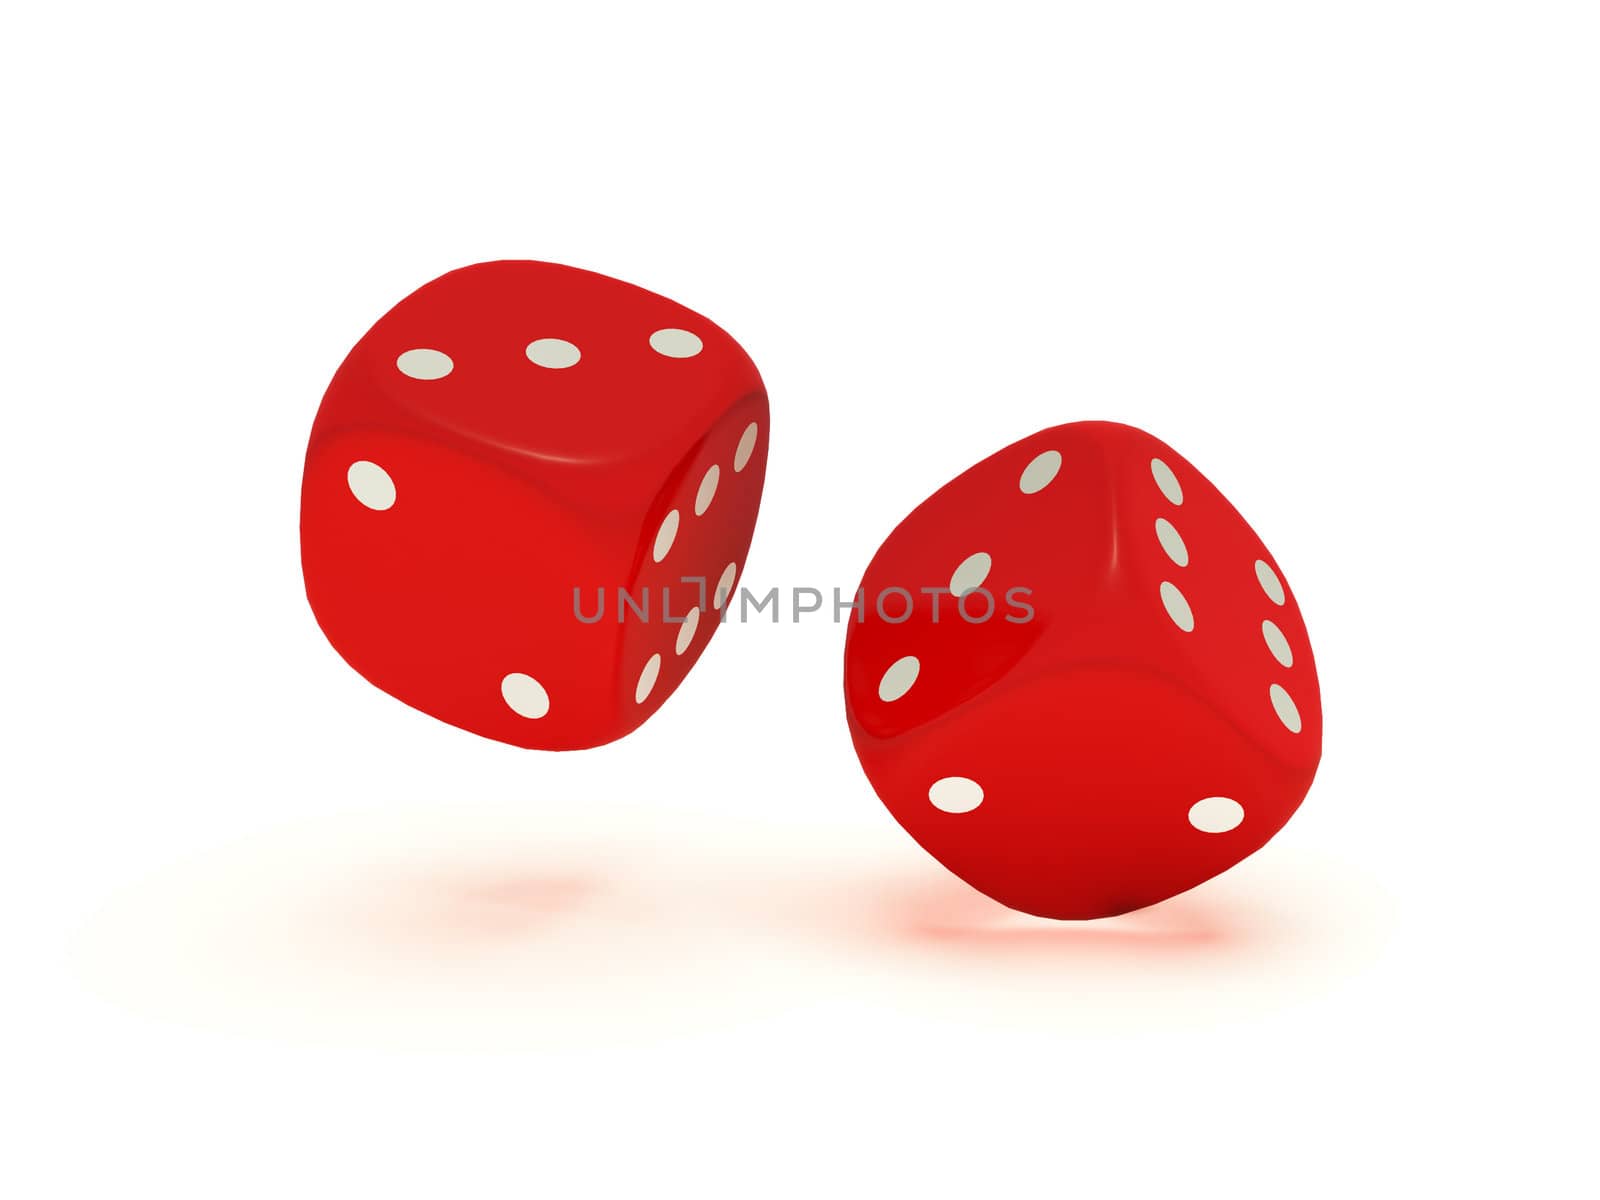 Two floating red dices on a white background.